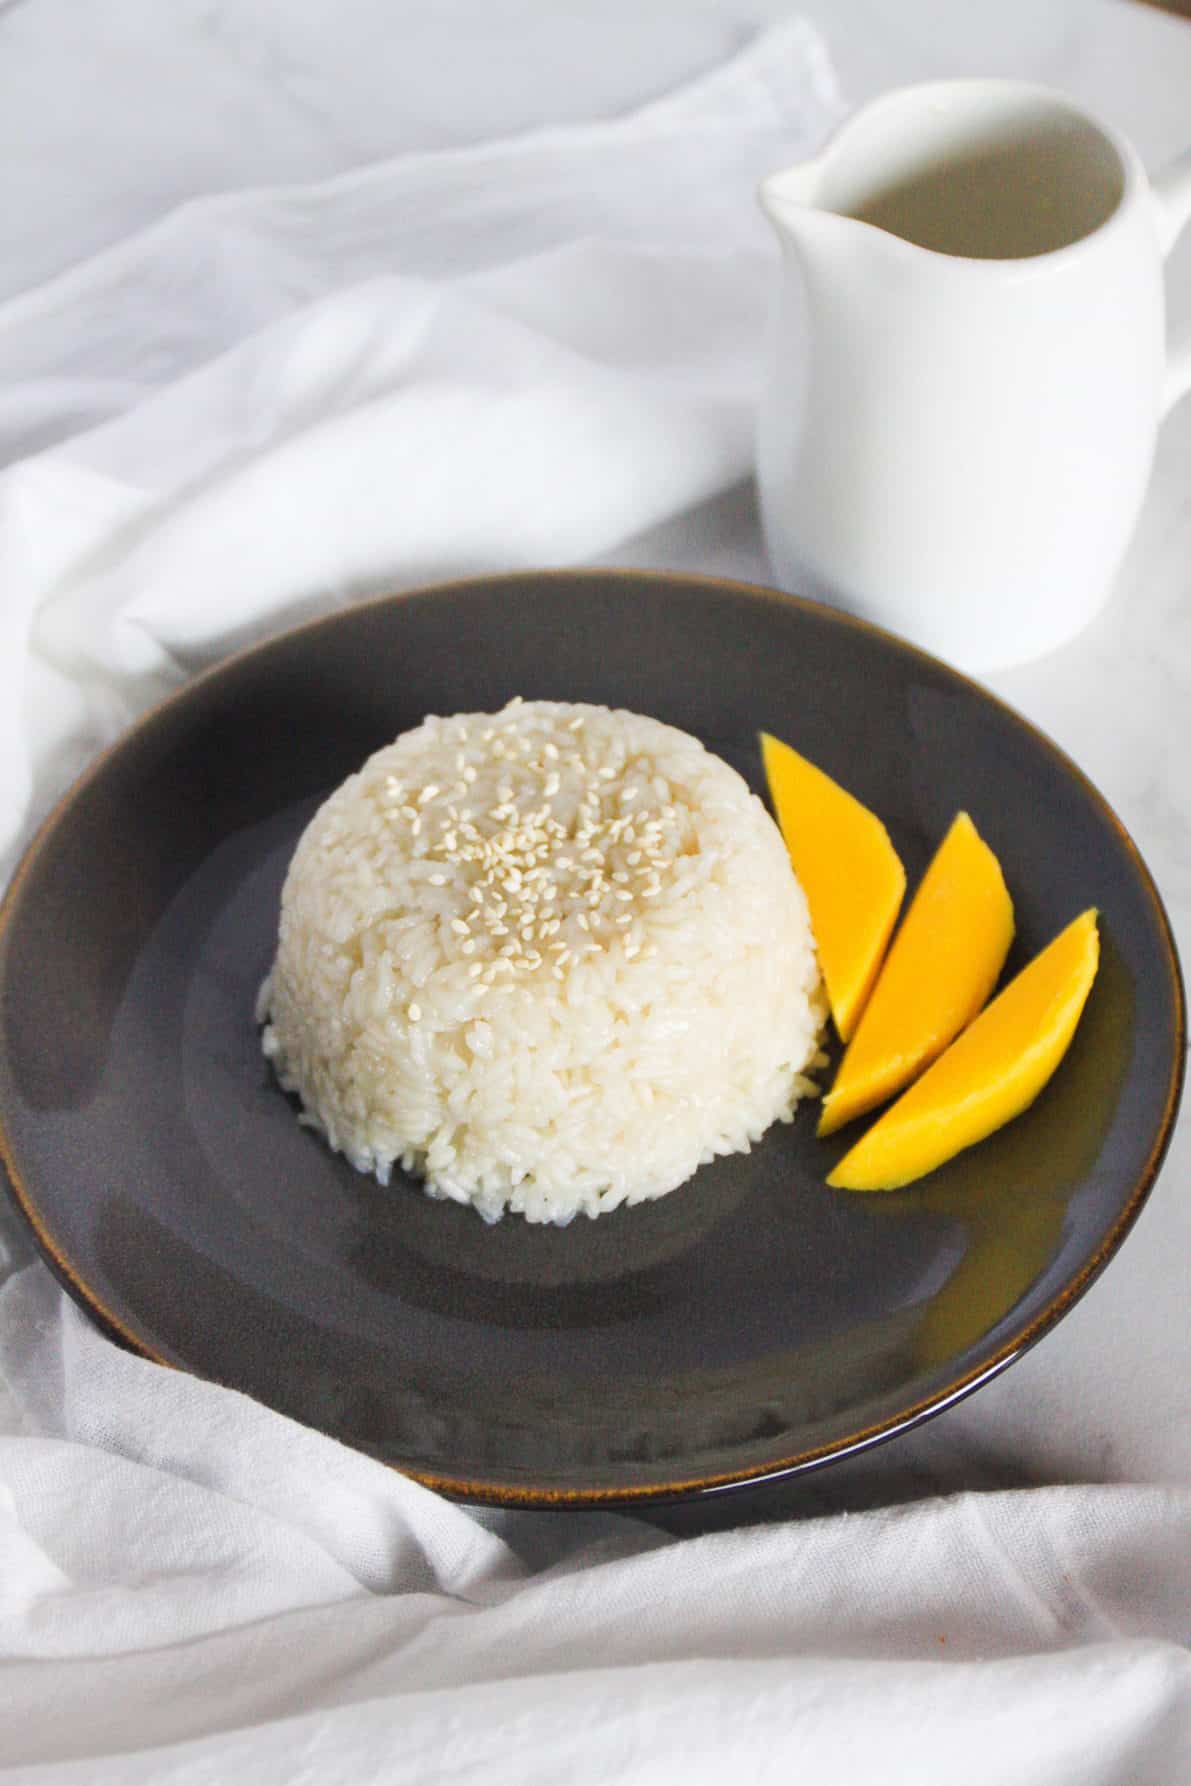 Thai Mango Sticky Rice placed on a gray plate on a white marble surface.